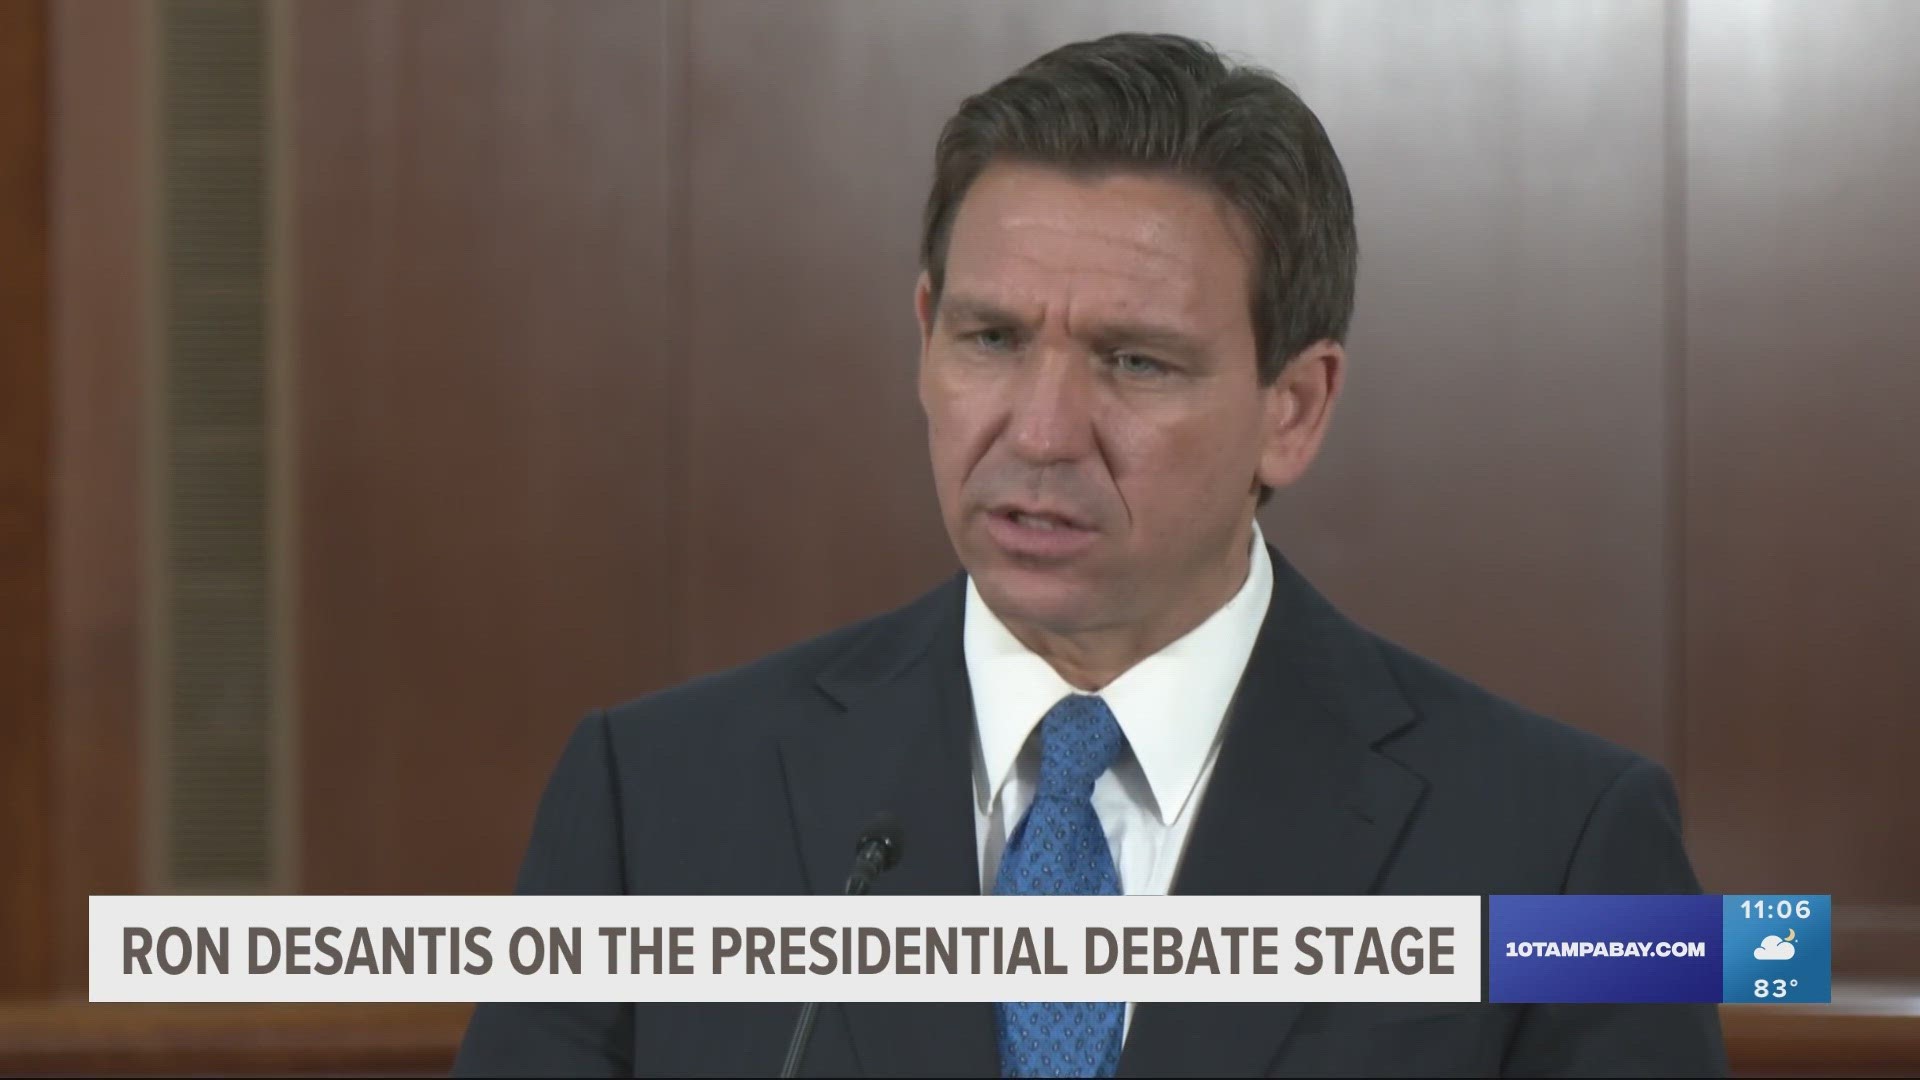 With just days between now and the first 2024 GOP presidential debate, Gov. Ron DeSantis will be hitting the stage with other Republican hopefuls.